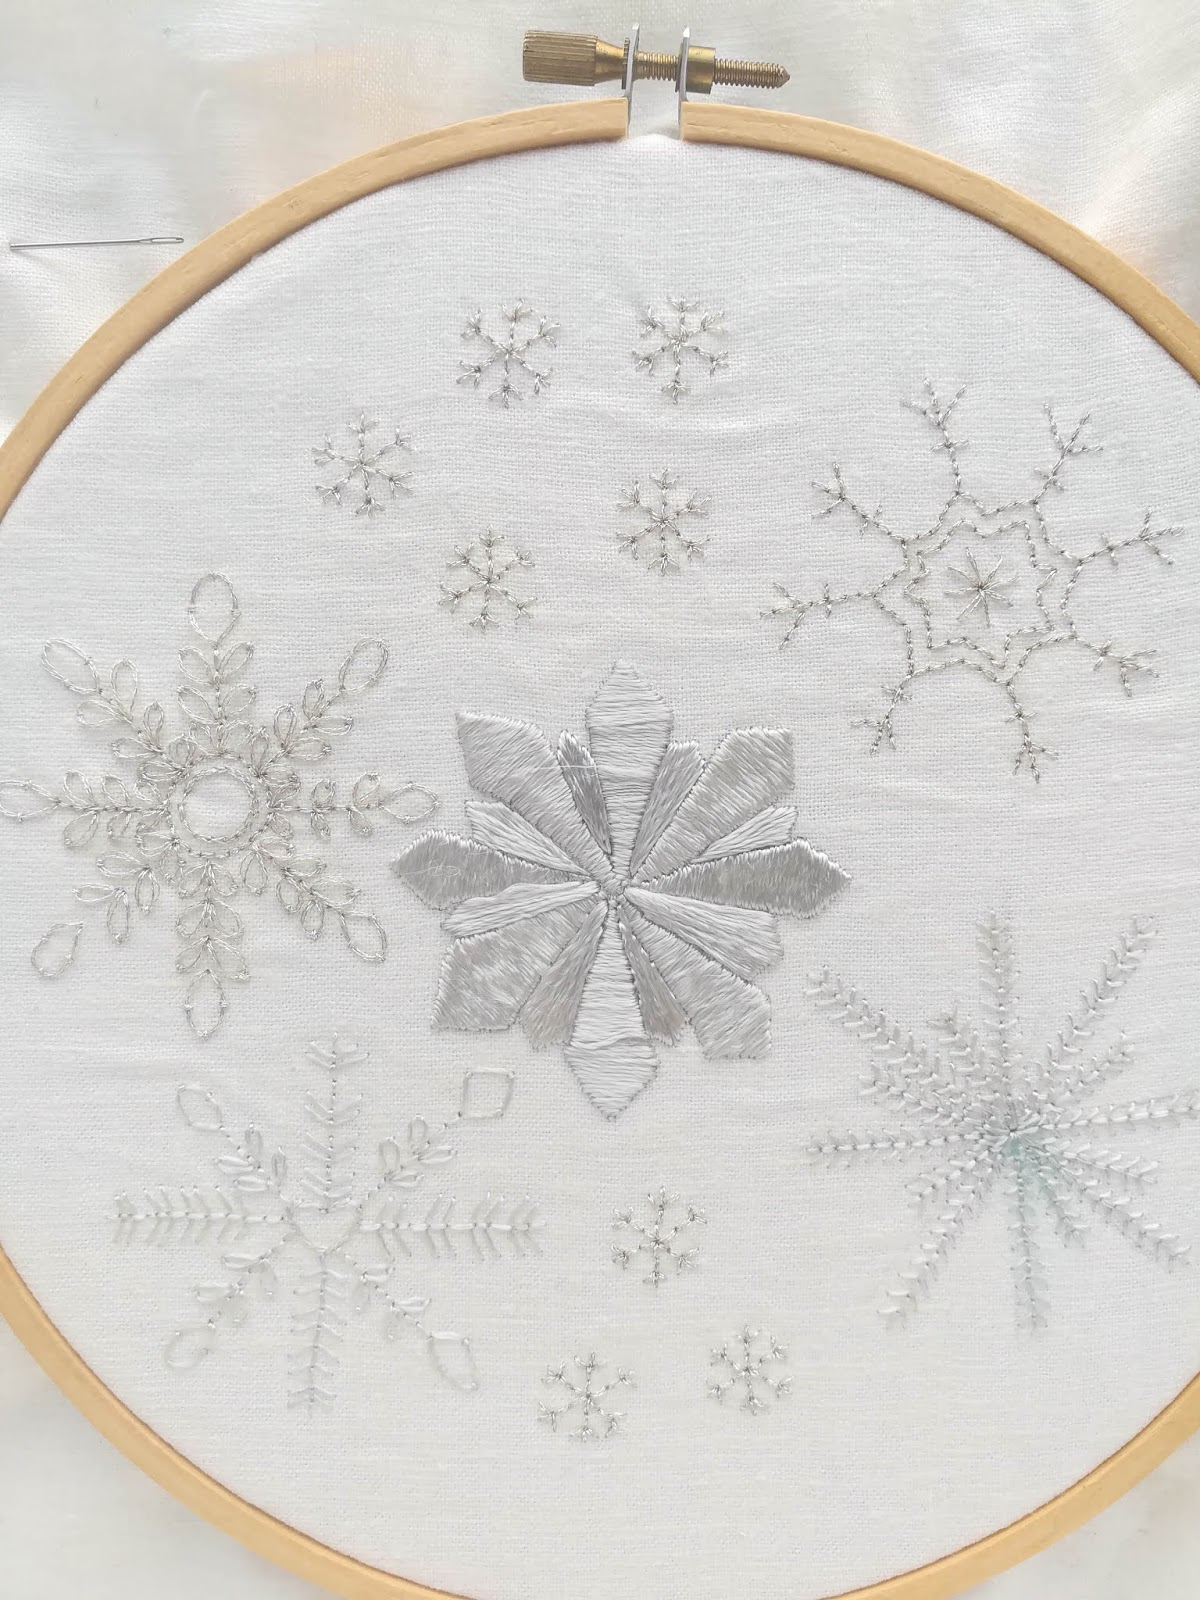 Snowflake Embroidery Pattern A Lively Hope Snowflakes Hand Embroidery Pattern Free